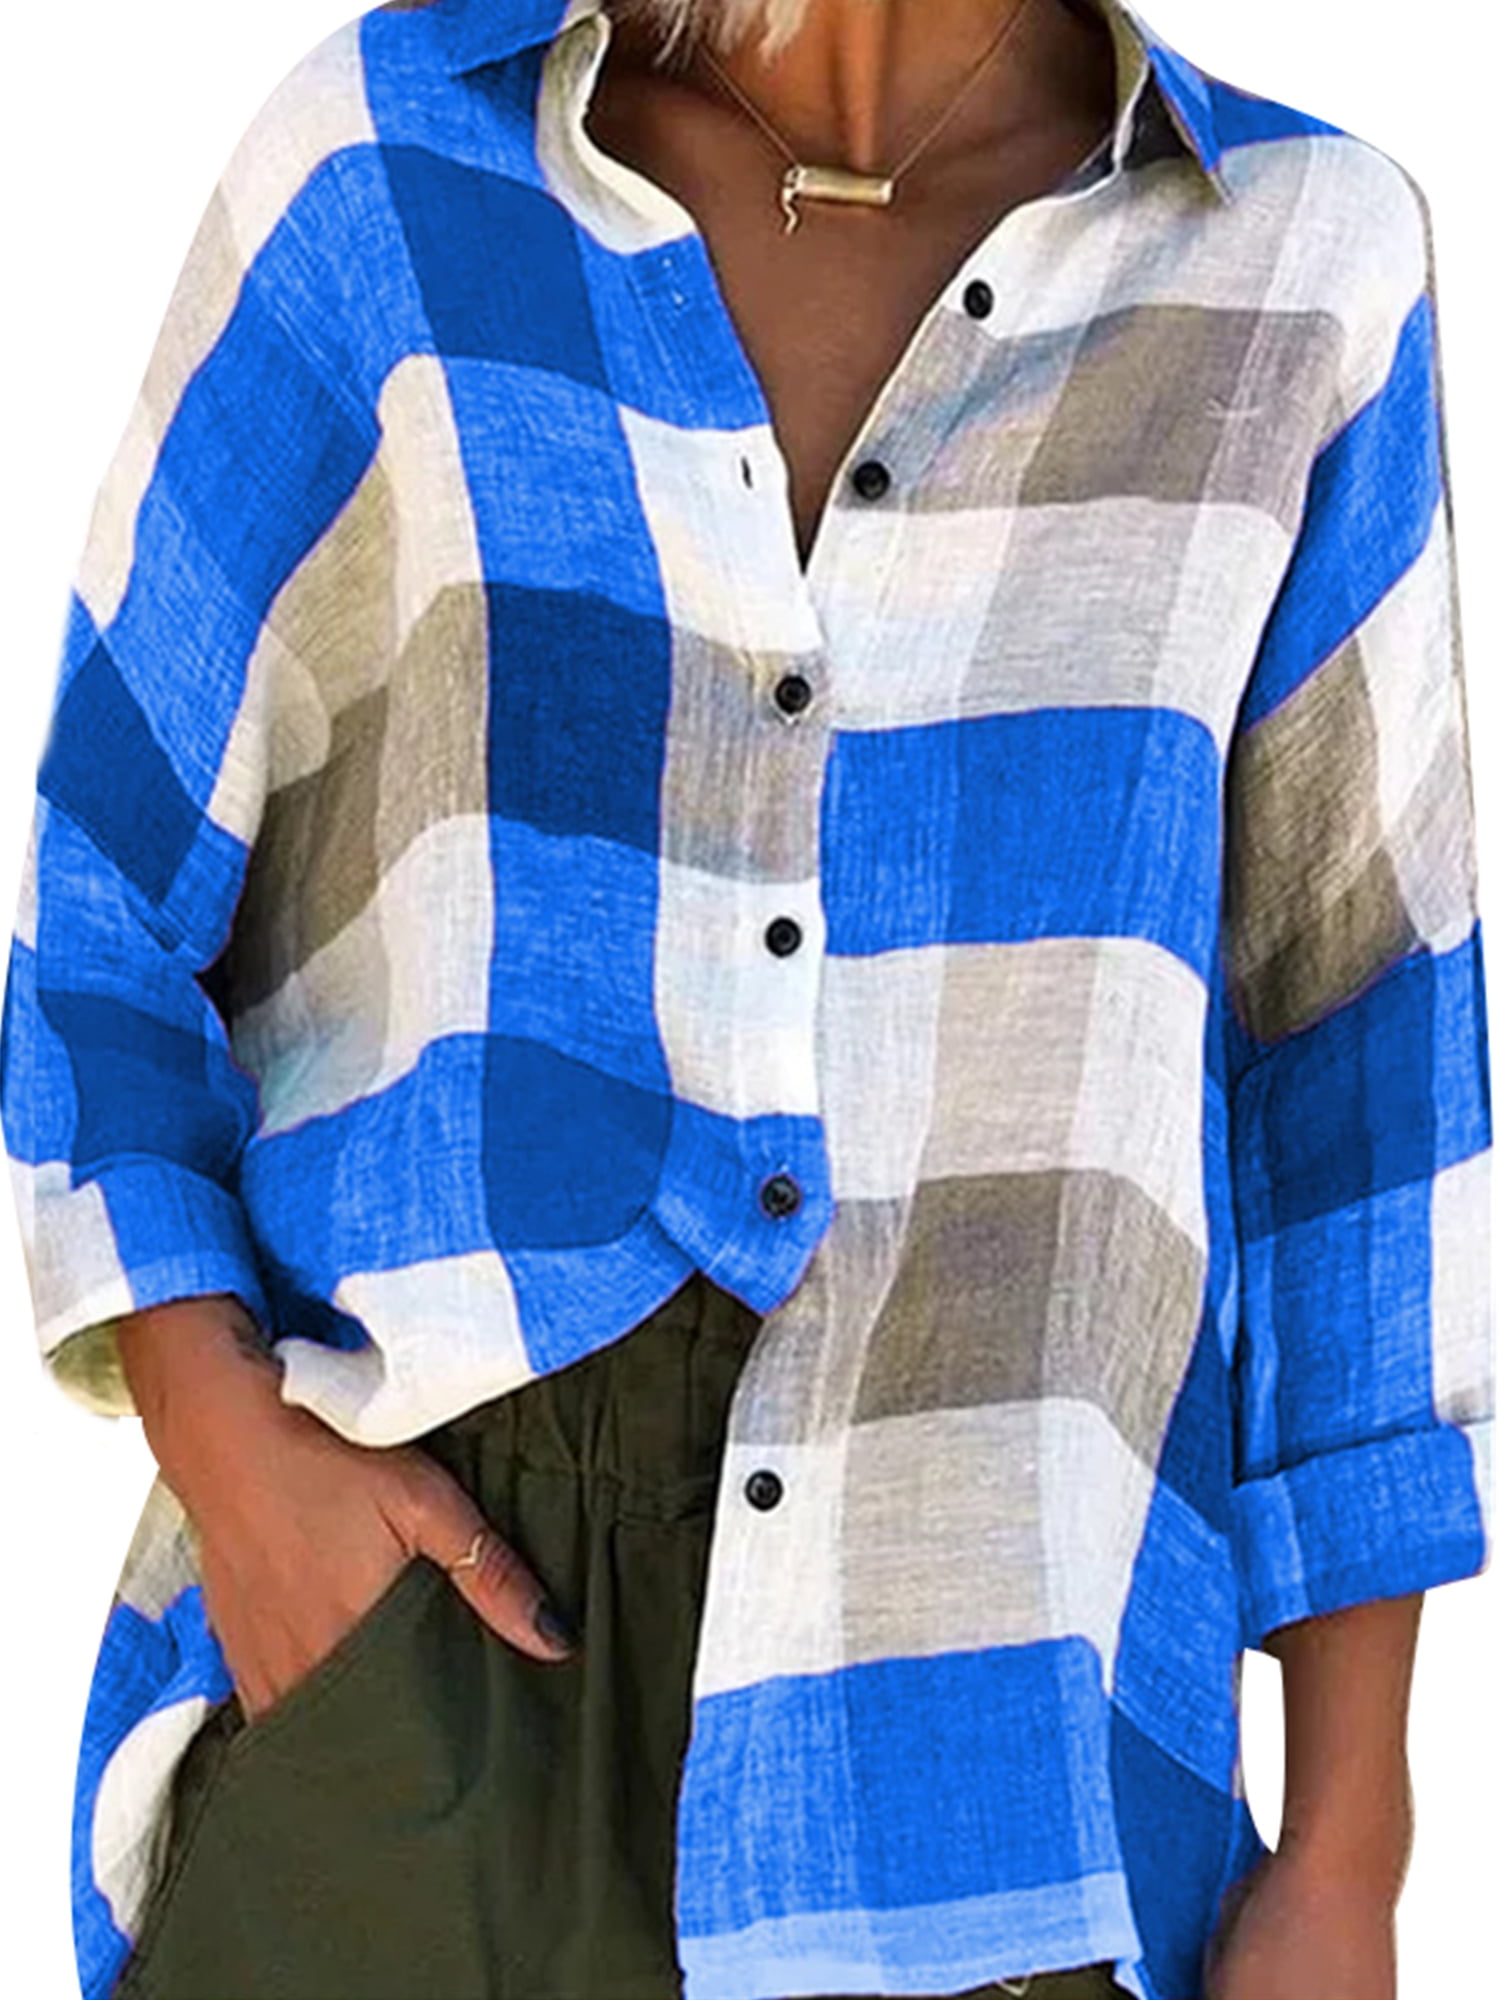 Checkered Blouses Tops Tee Shirts Mosaic Pixel Pattern Round Crew Neck T Shirt Top XX-Large